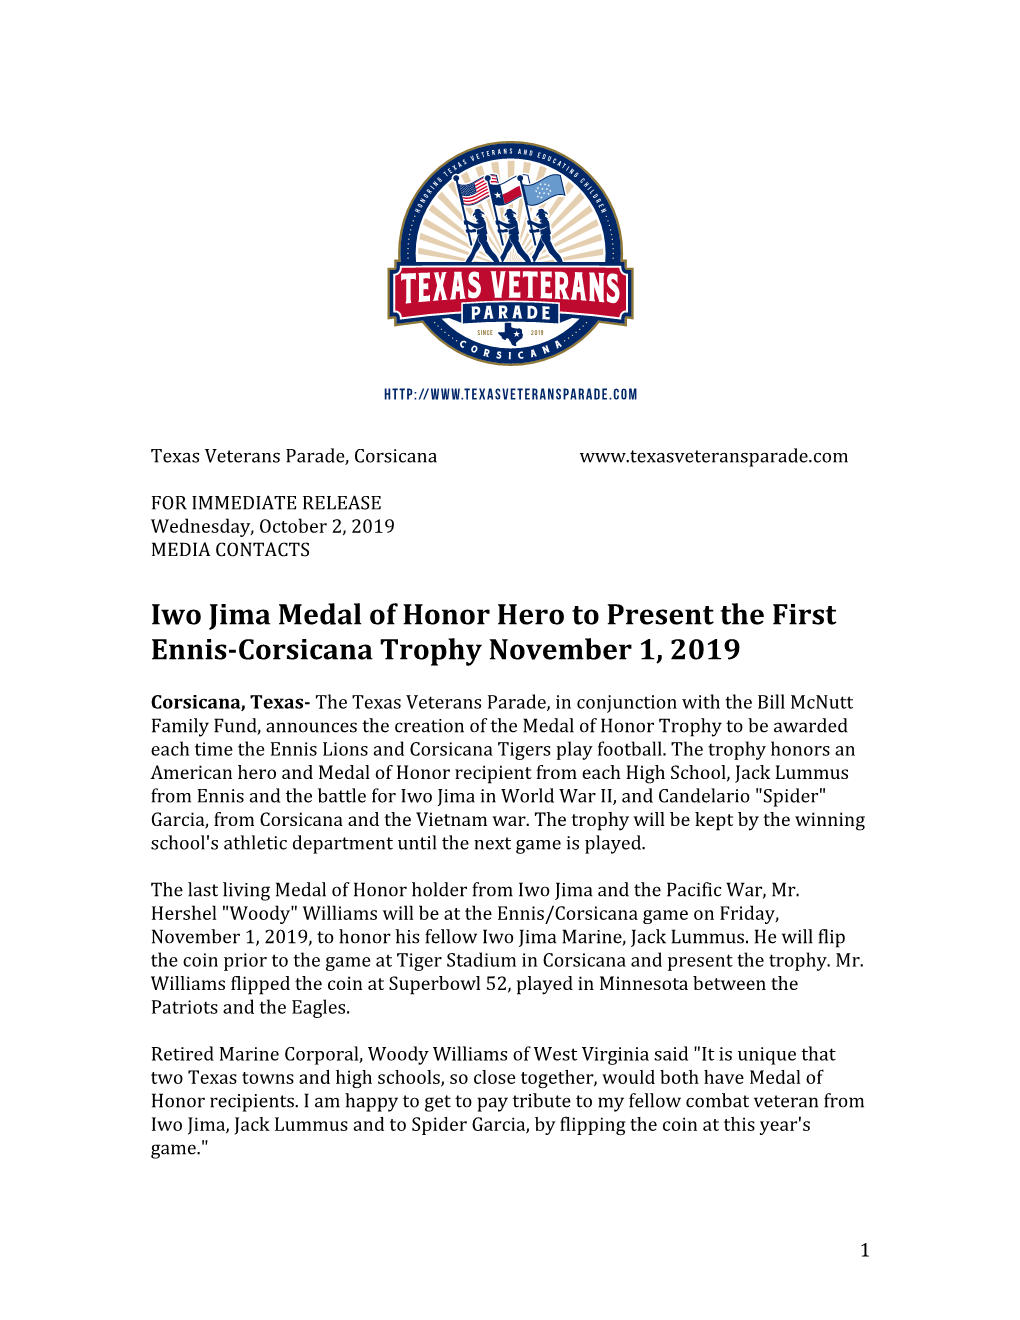 Iwo Jima Medal of Honor Hero to Present the First Ennis-Corsicana Trophy November 1, 2019